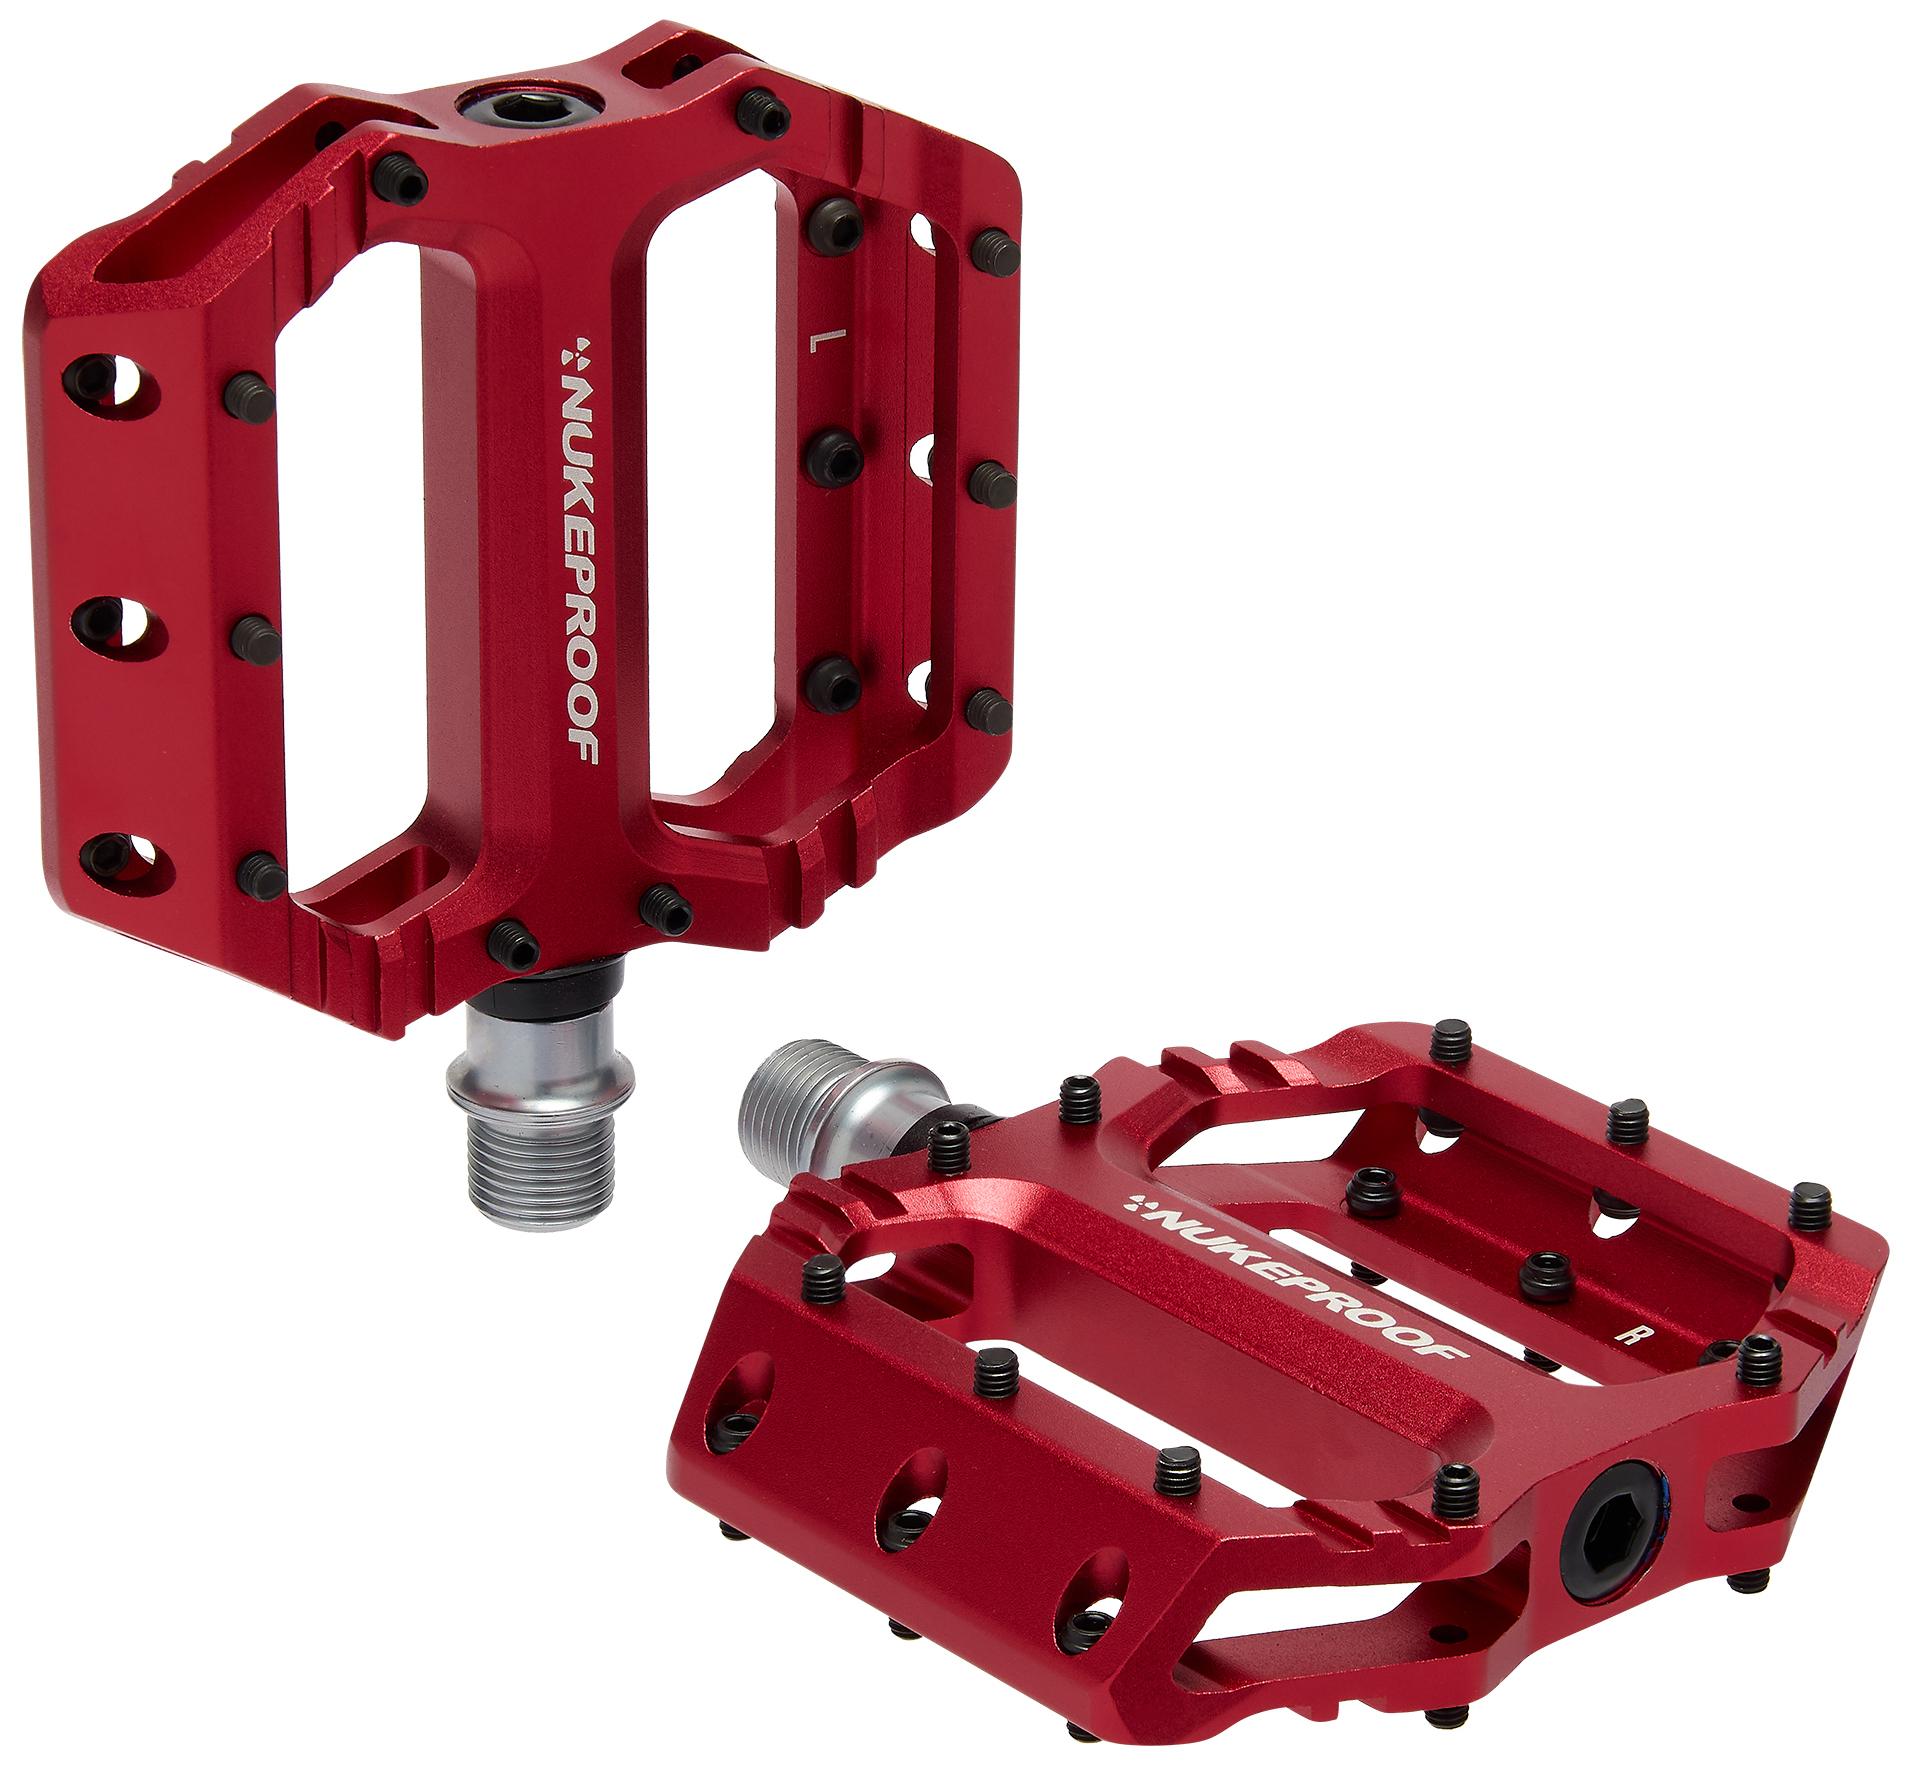 Nukeproof Urchin Youth Flat Pedals - Red